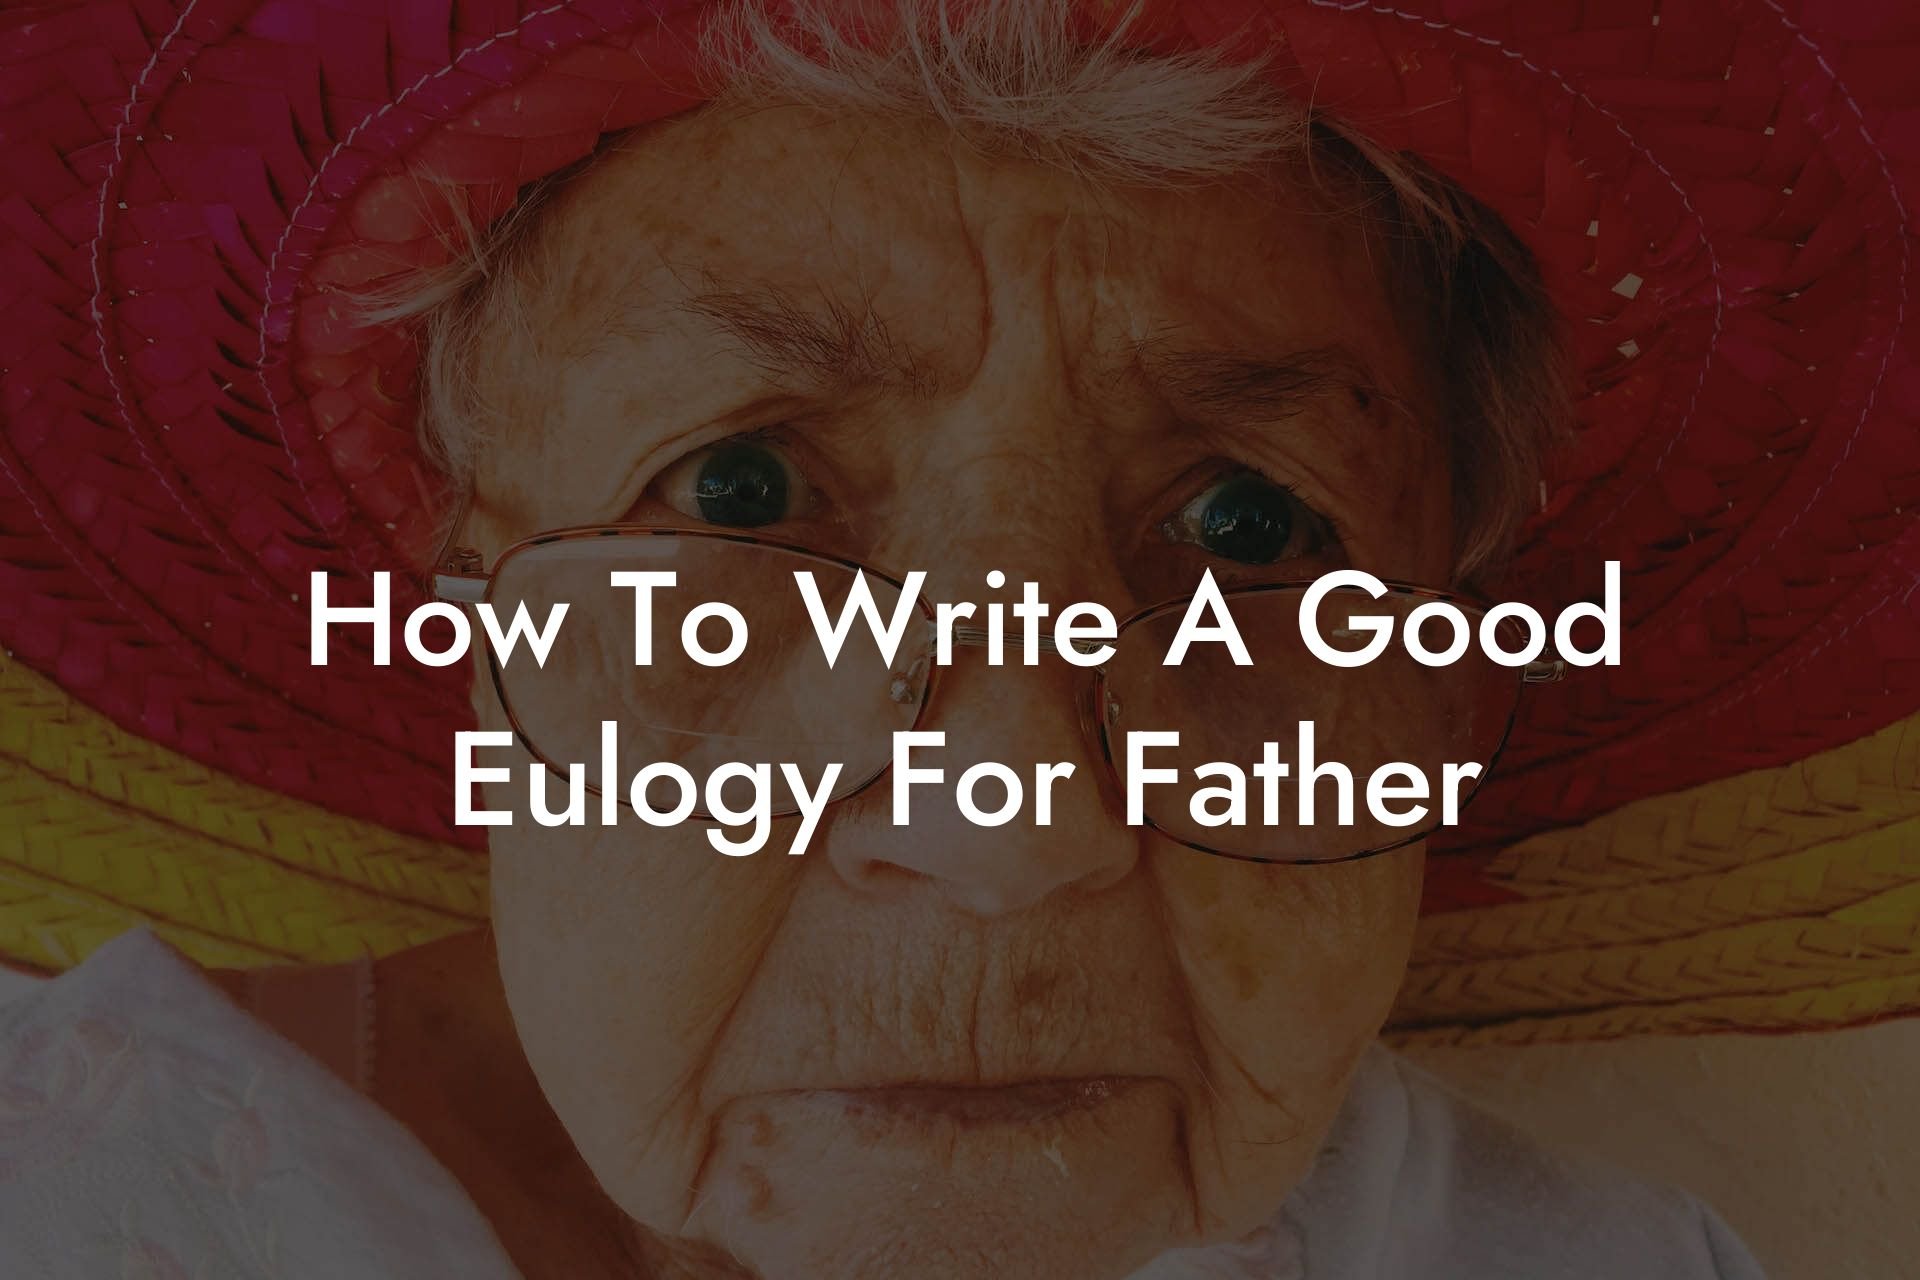 How To Write A Good Eulogy For Father